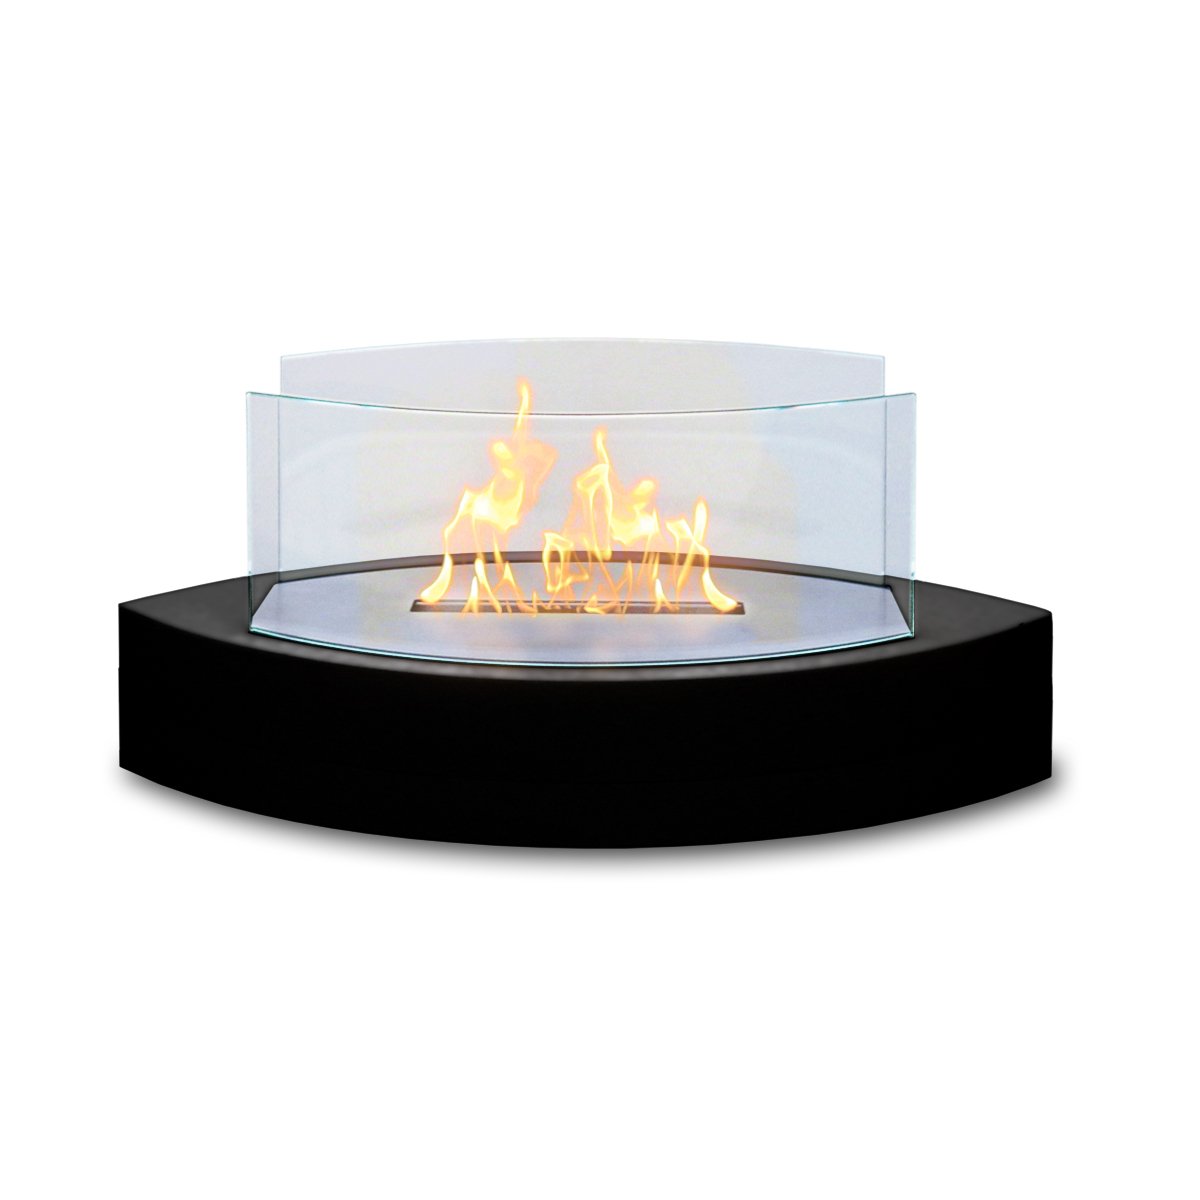 Ventless Gas Fireplace Smell Lovely Anywhere Fireplace Lexington Table top Ethanol Fireplace Black